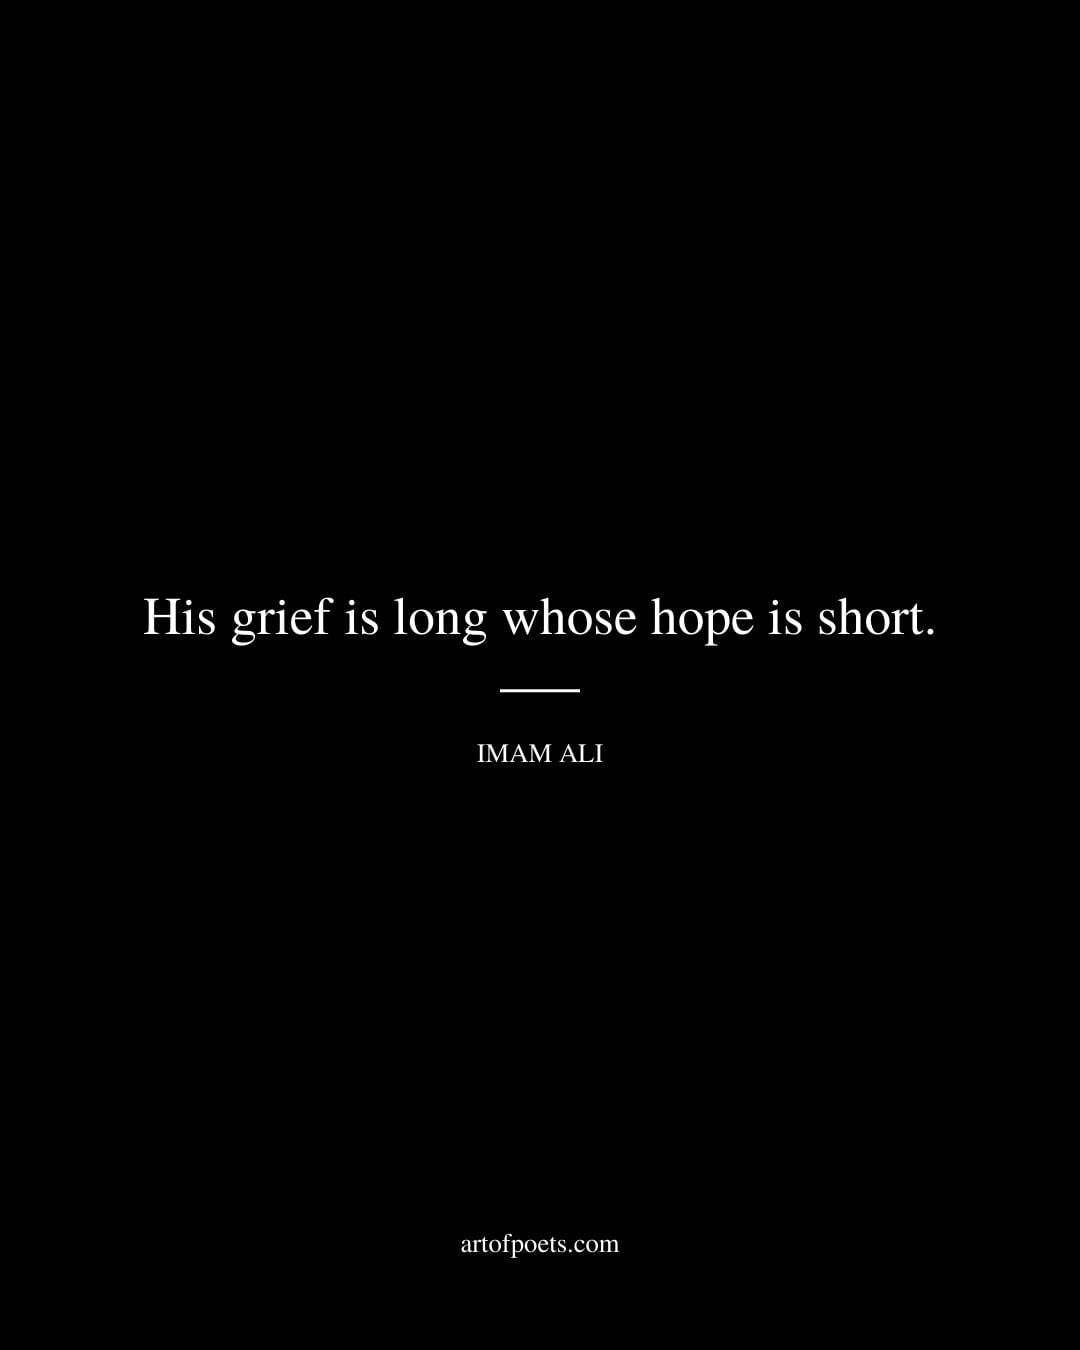 His grief is long whose hope is short. Imam Ali